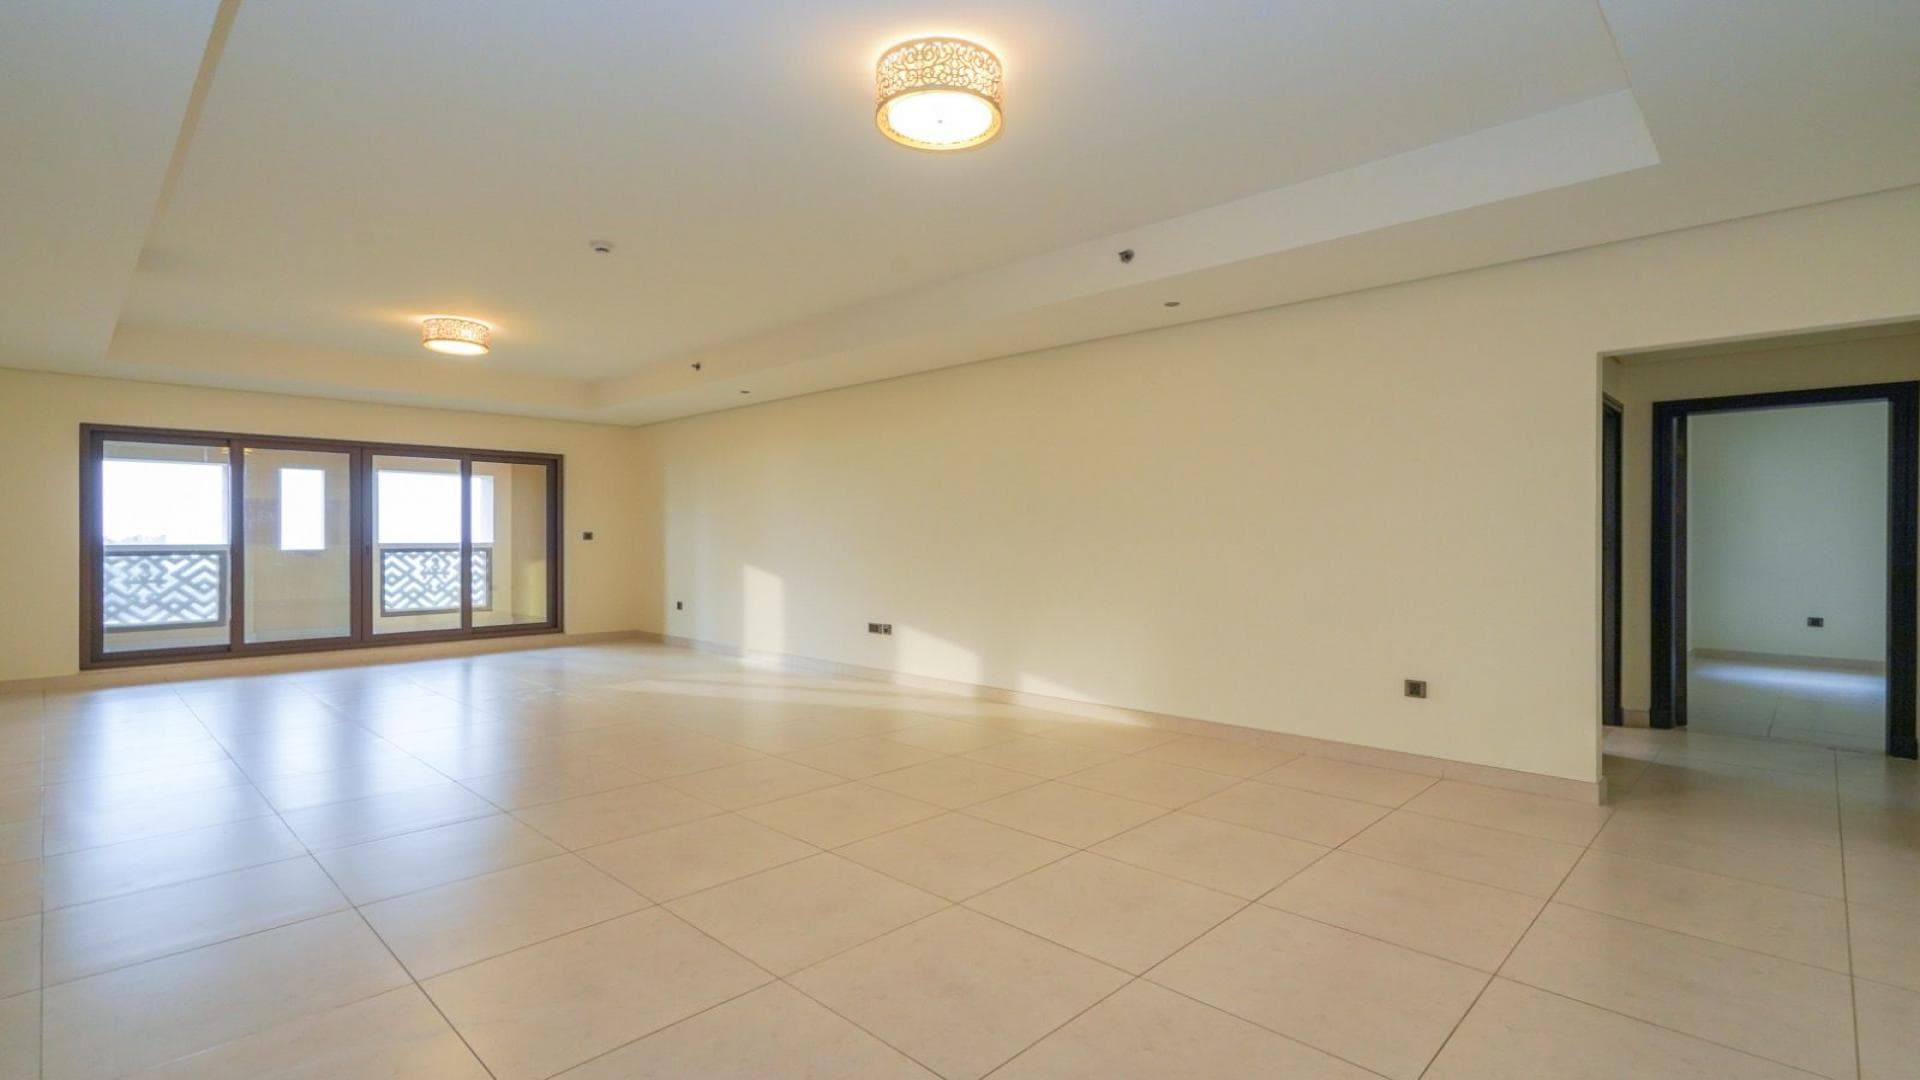 3 Bedroom Apartment For Sale Grand Residence Lp38241 2d115cdece52ae00.jpeg